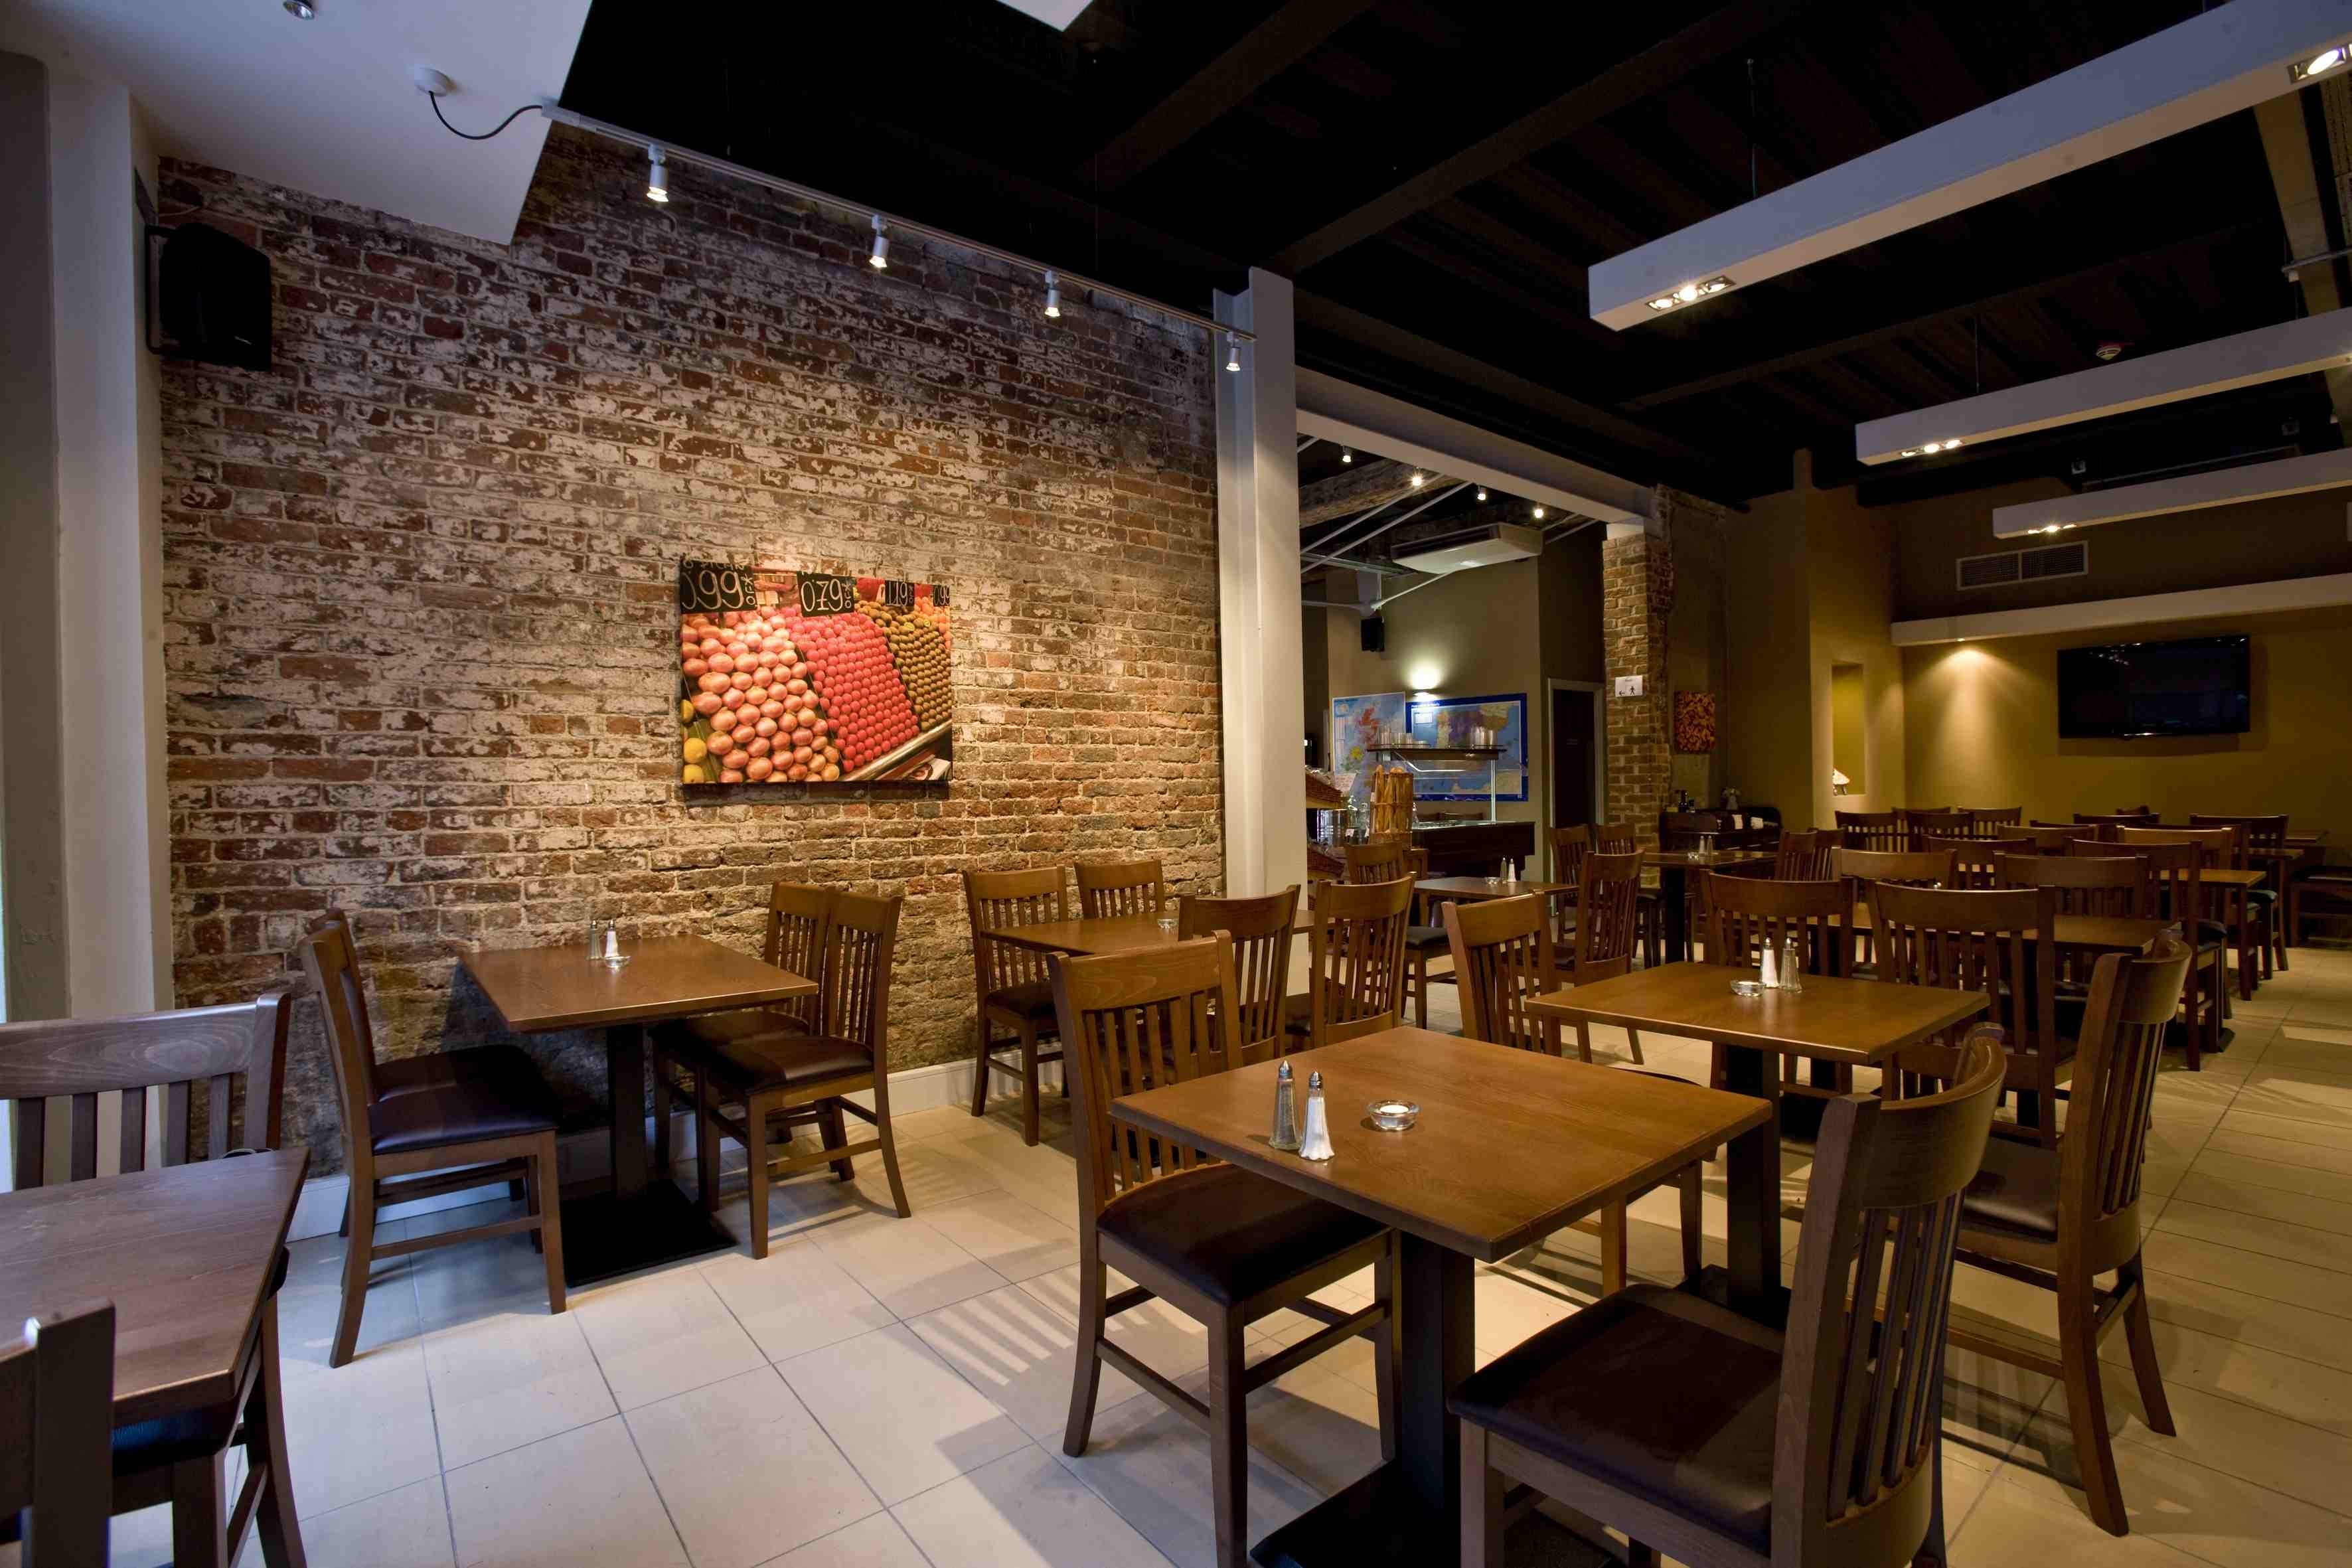 Getting the Right Furniture For Your Restaurant | Restaurant Seating Blog